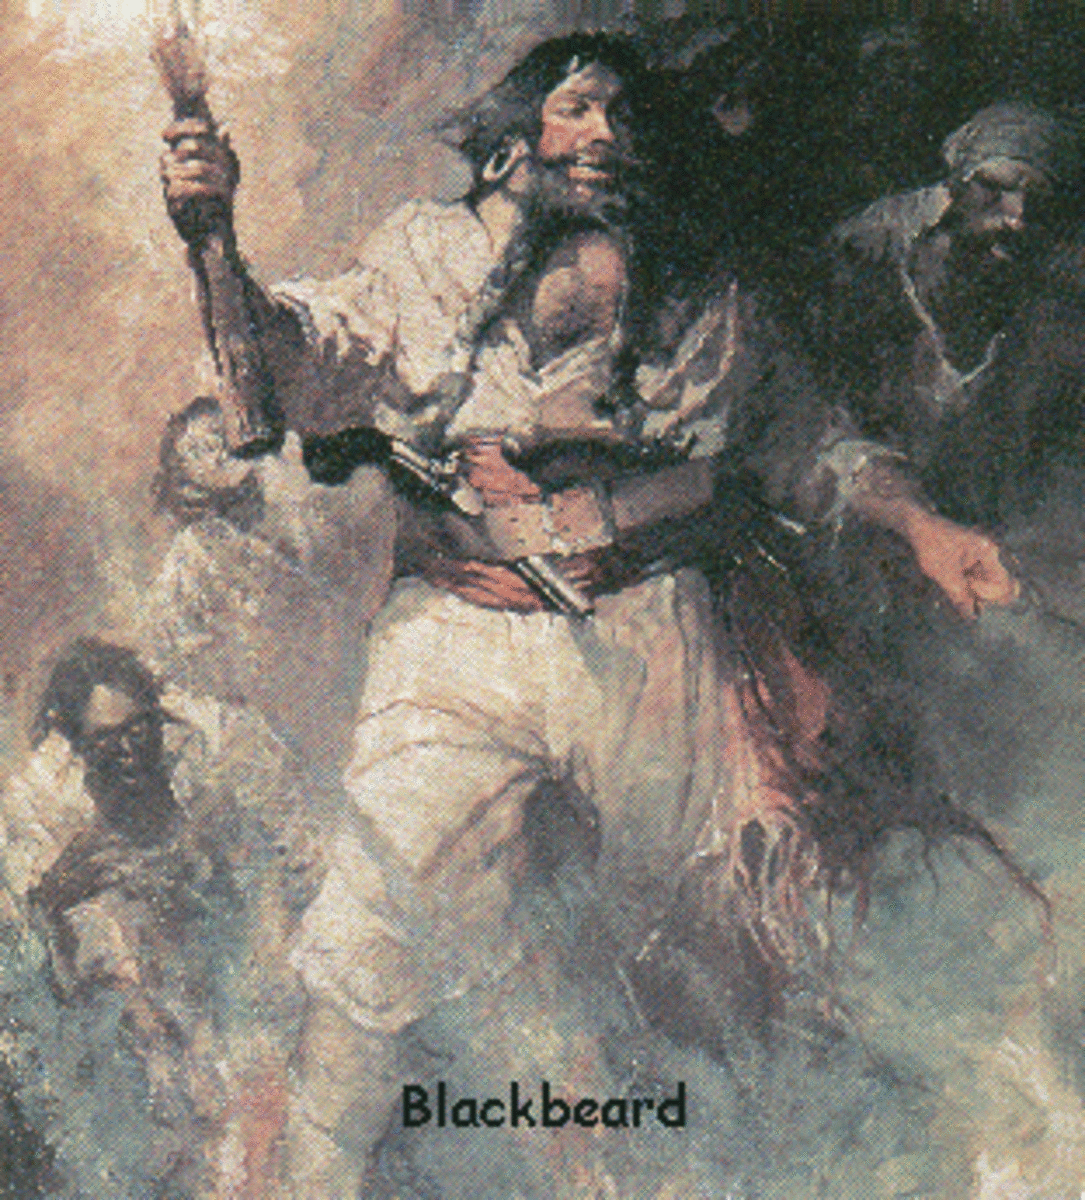 Blackbeard, Edward Teach , His Ghost Is Said To Still Haunt The Outer Banks Of N.C.